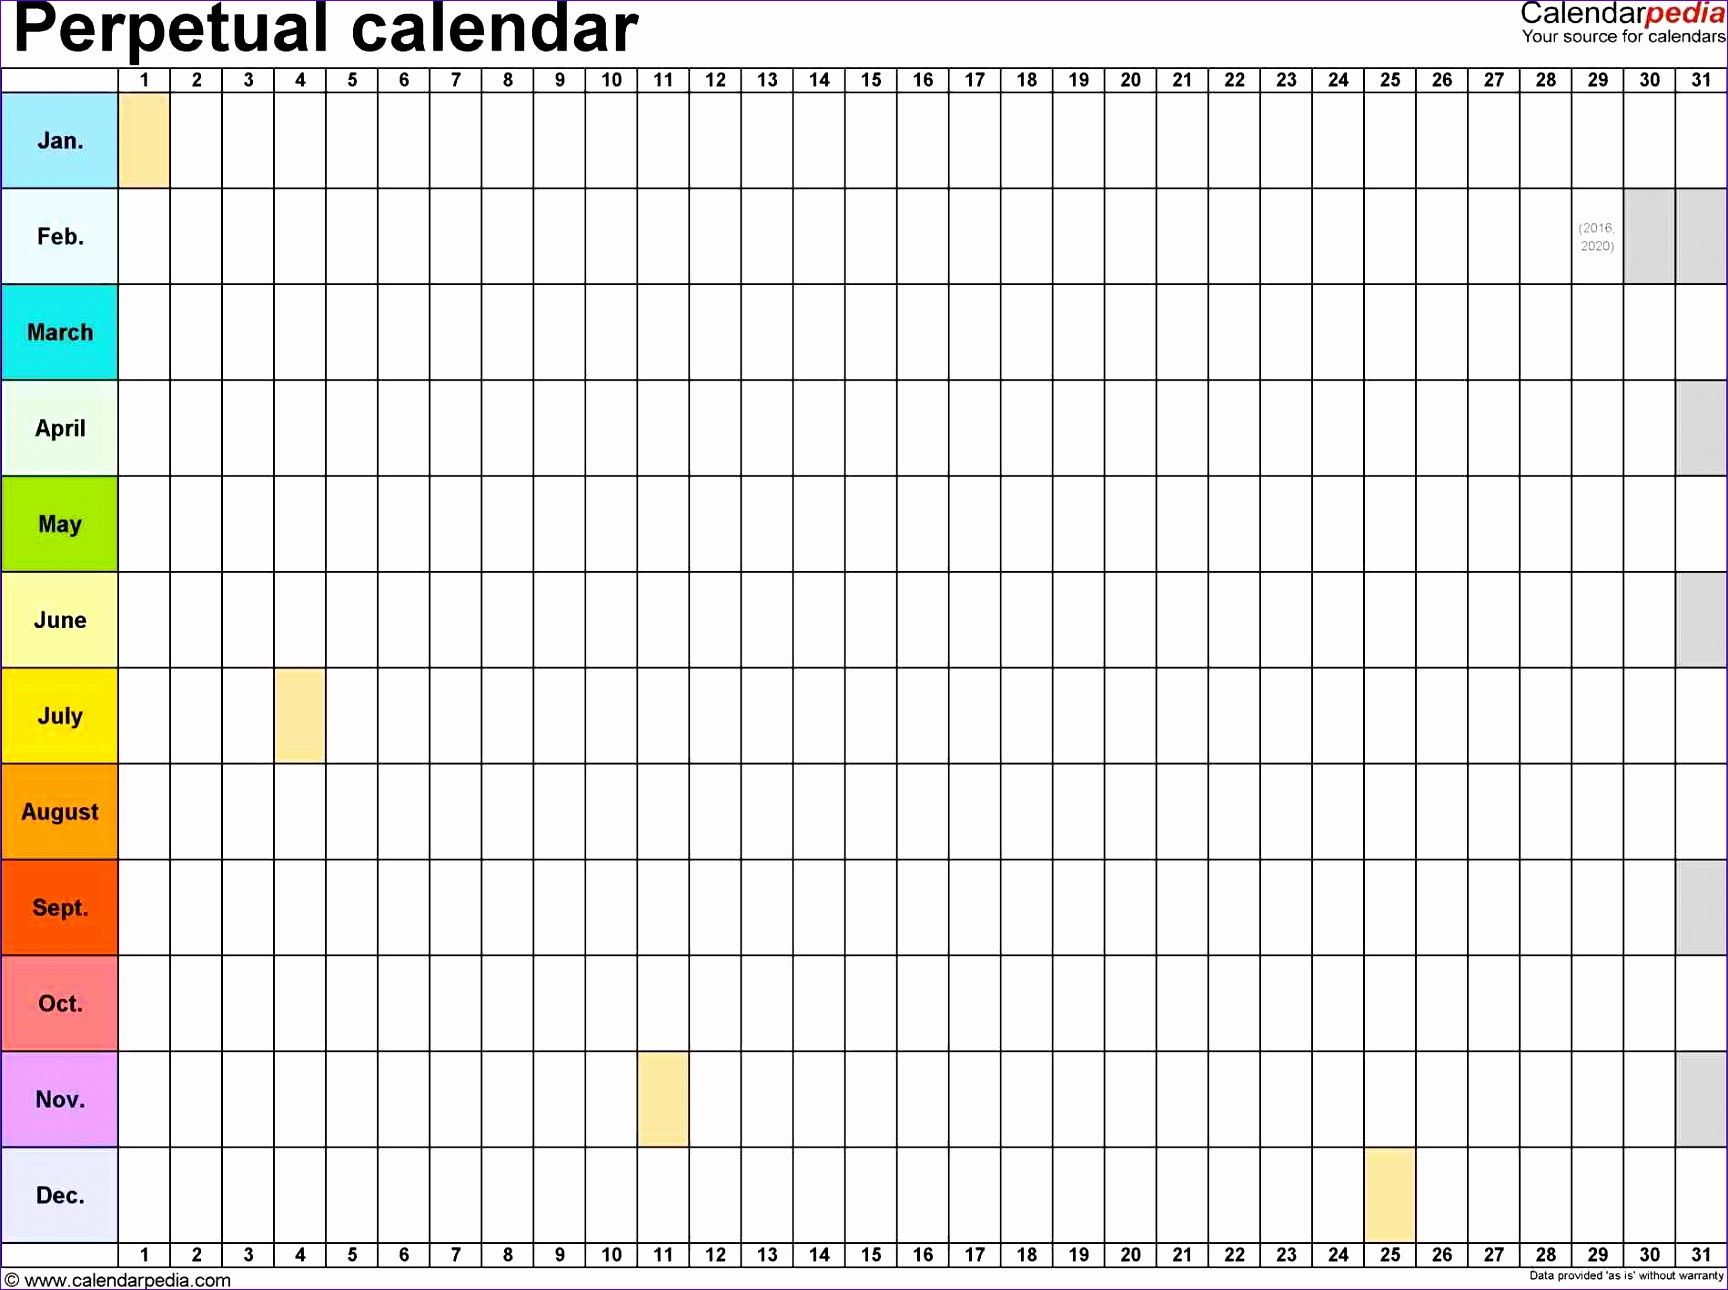 perpetual Monthly Planning Calendar Template Excel calendars free printable excel templates calendar xlsxlsx calendar Monthly Planning Calendar Template Excel excel free